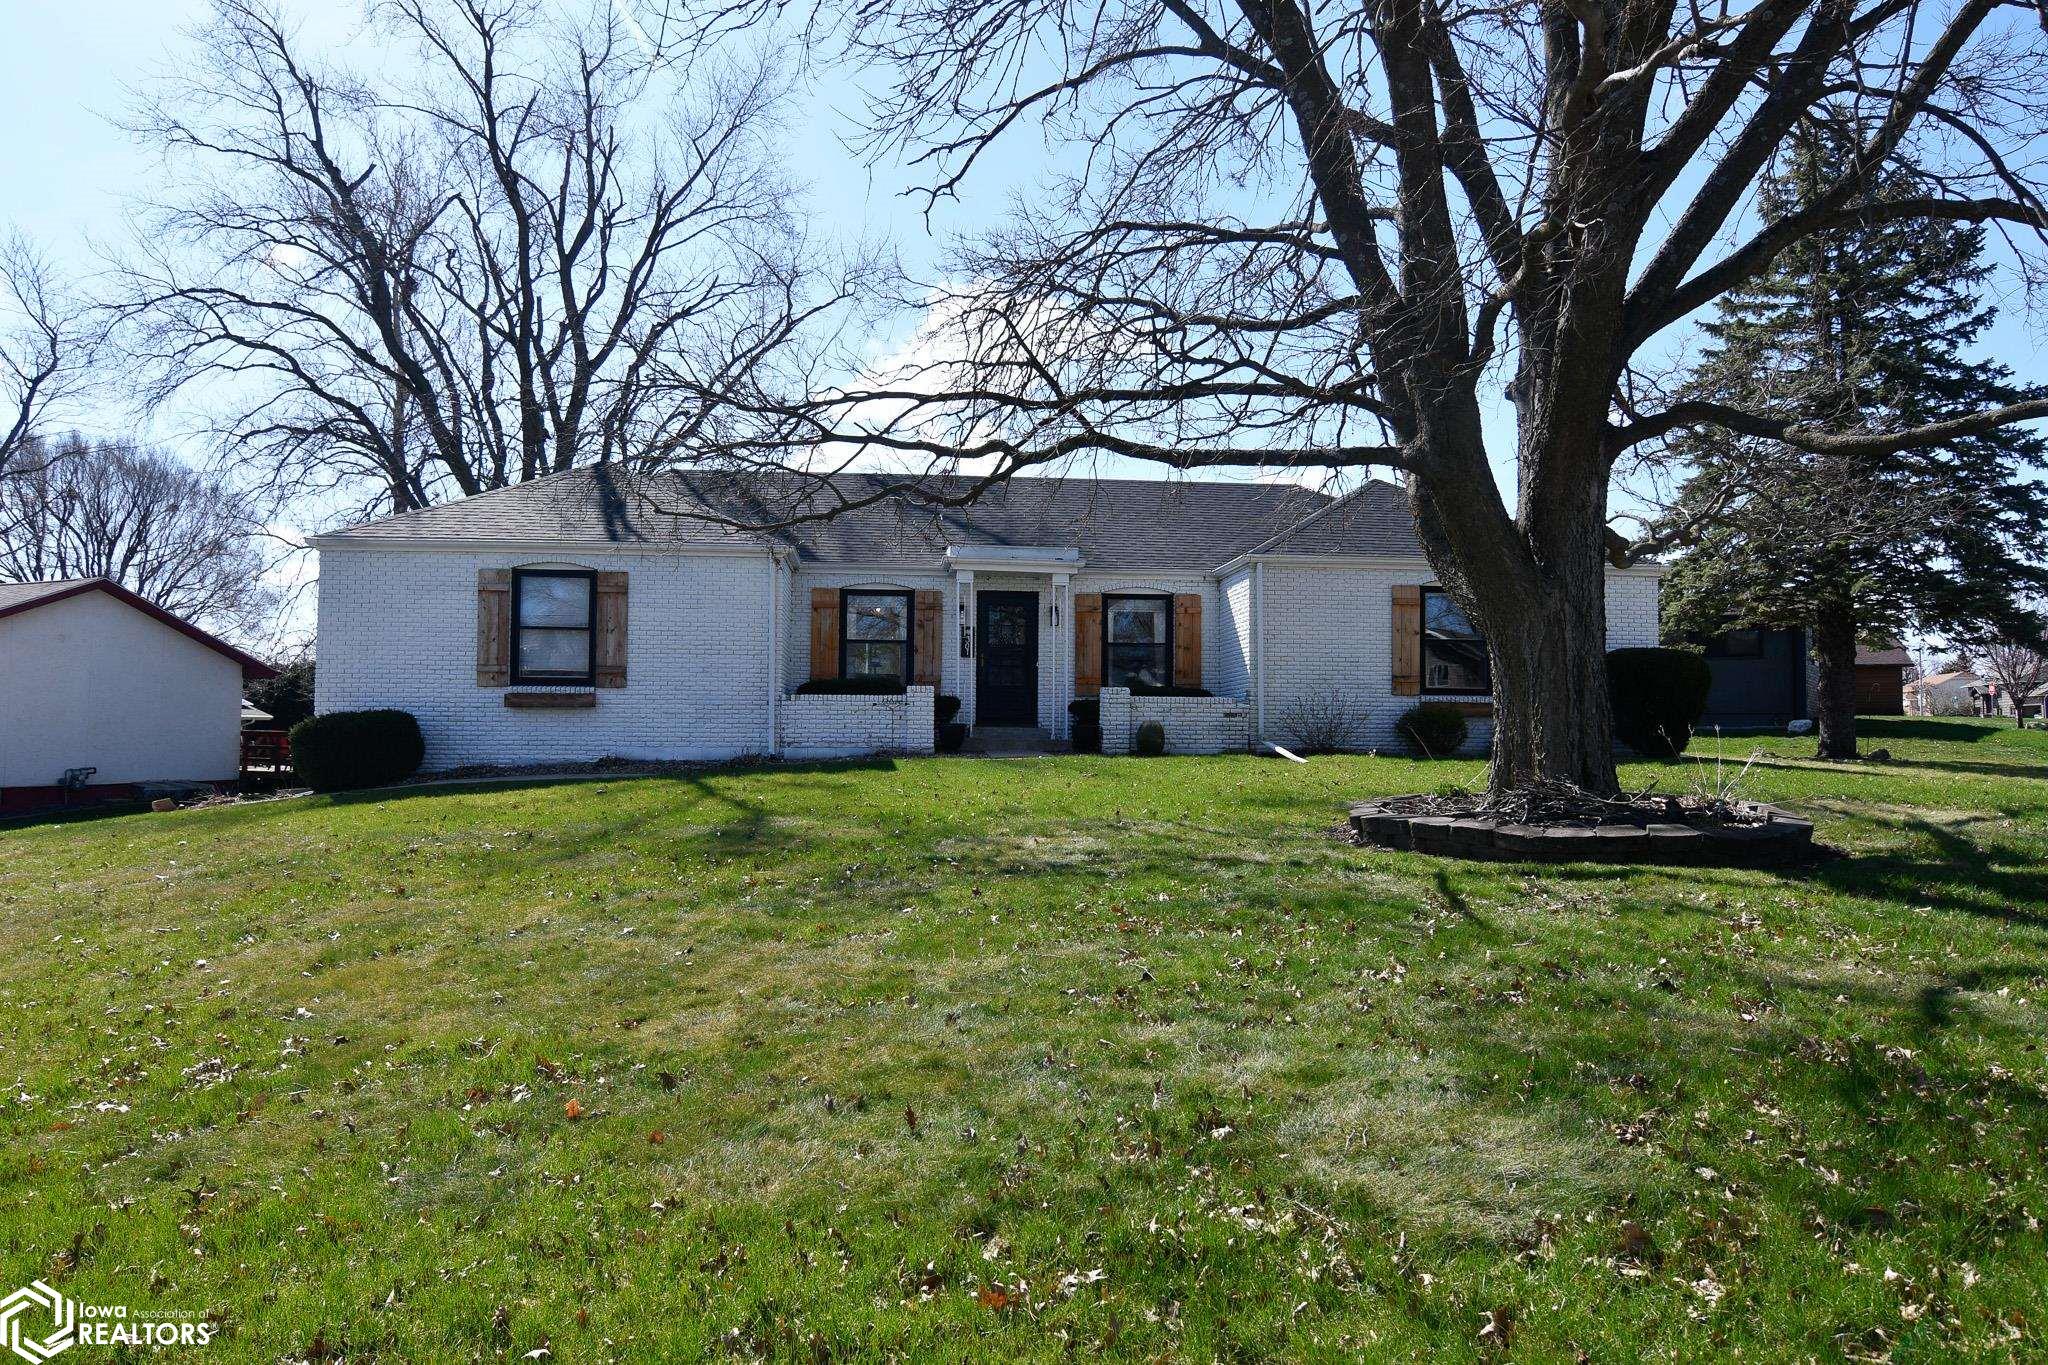 301 Friendly, Marshalltown, Iowa 50158, 3 Bedrooms Bedrooms, ,1 BathroomBathrooms,Single Family,For Sale,Friendly,6316210